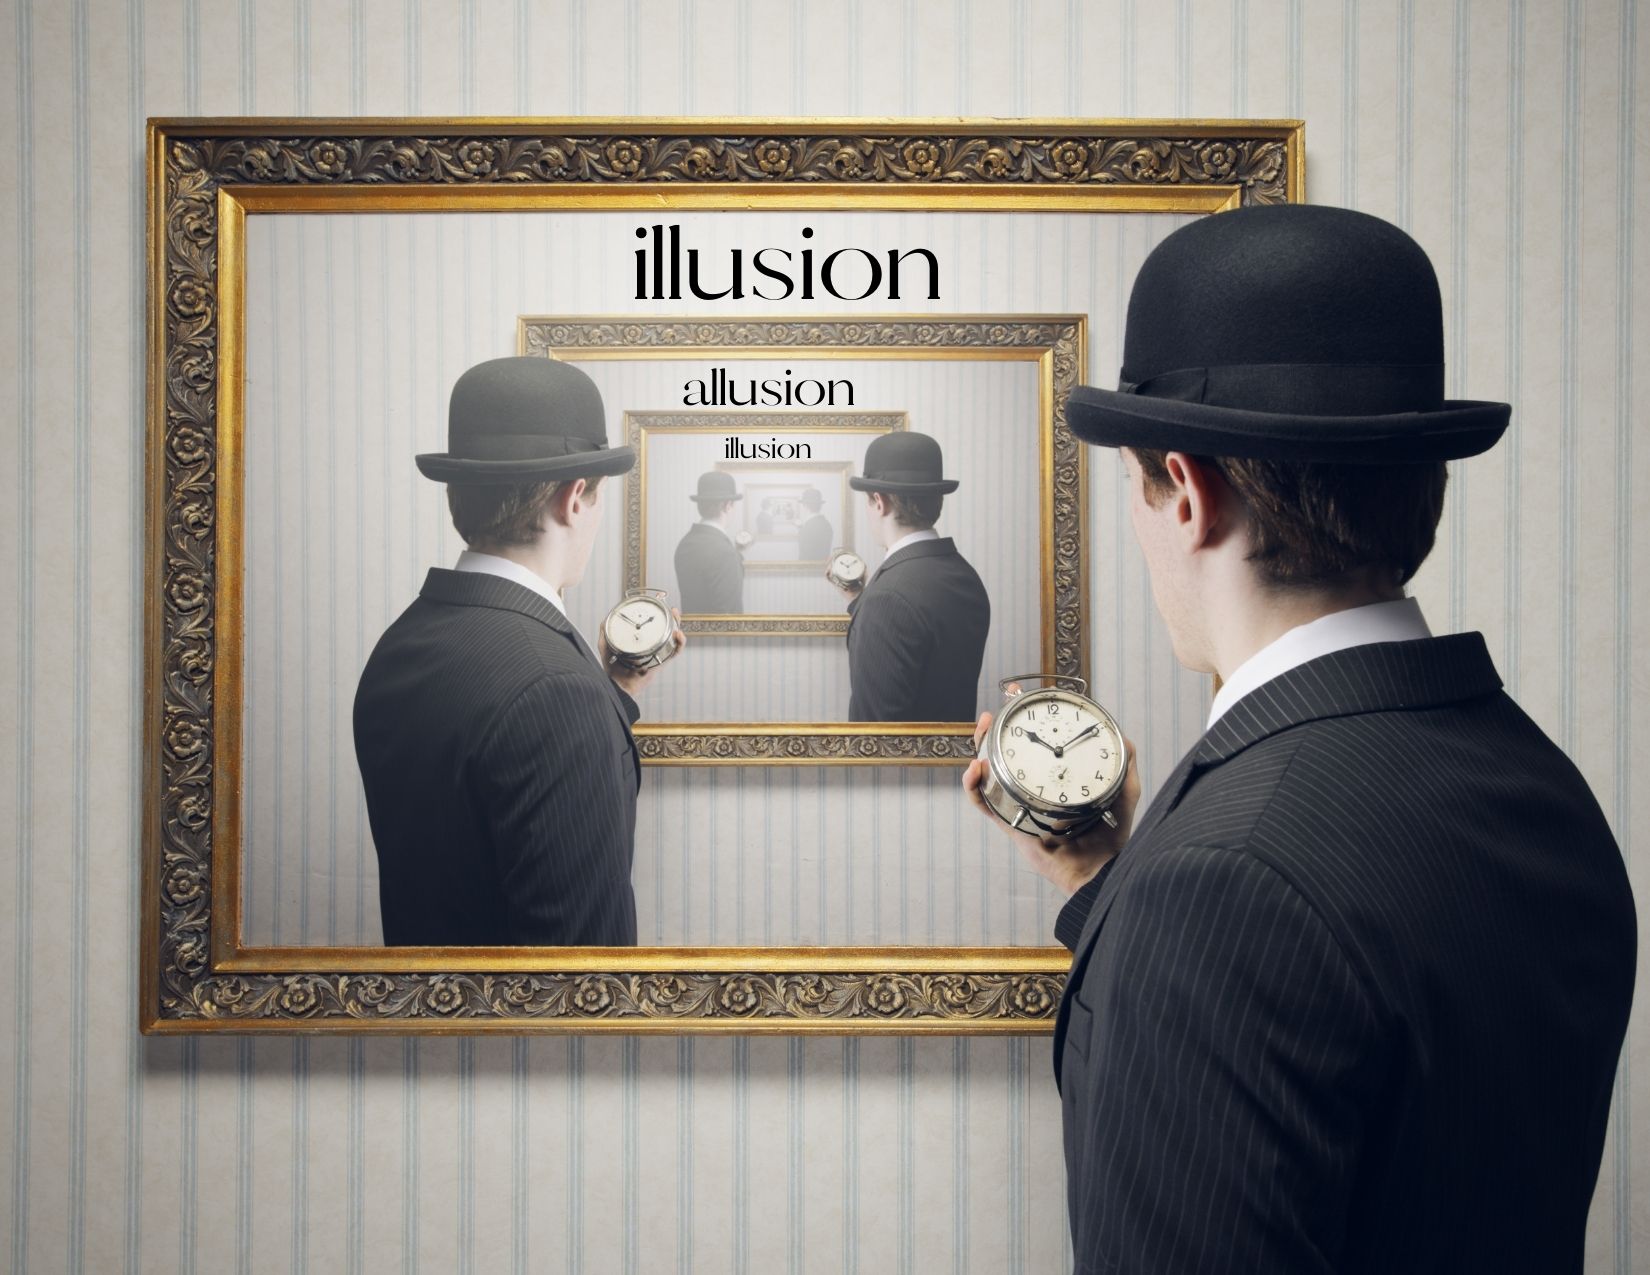 a picture of a mirror in a mirror with the words illusion and allusion